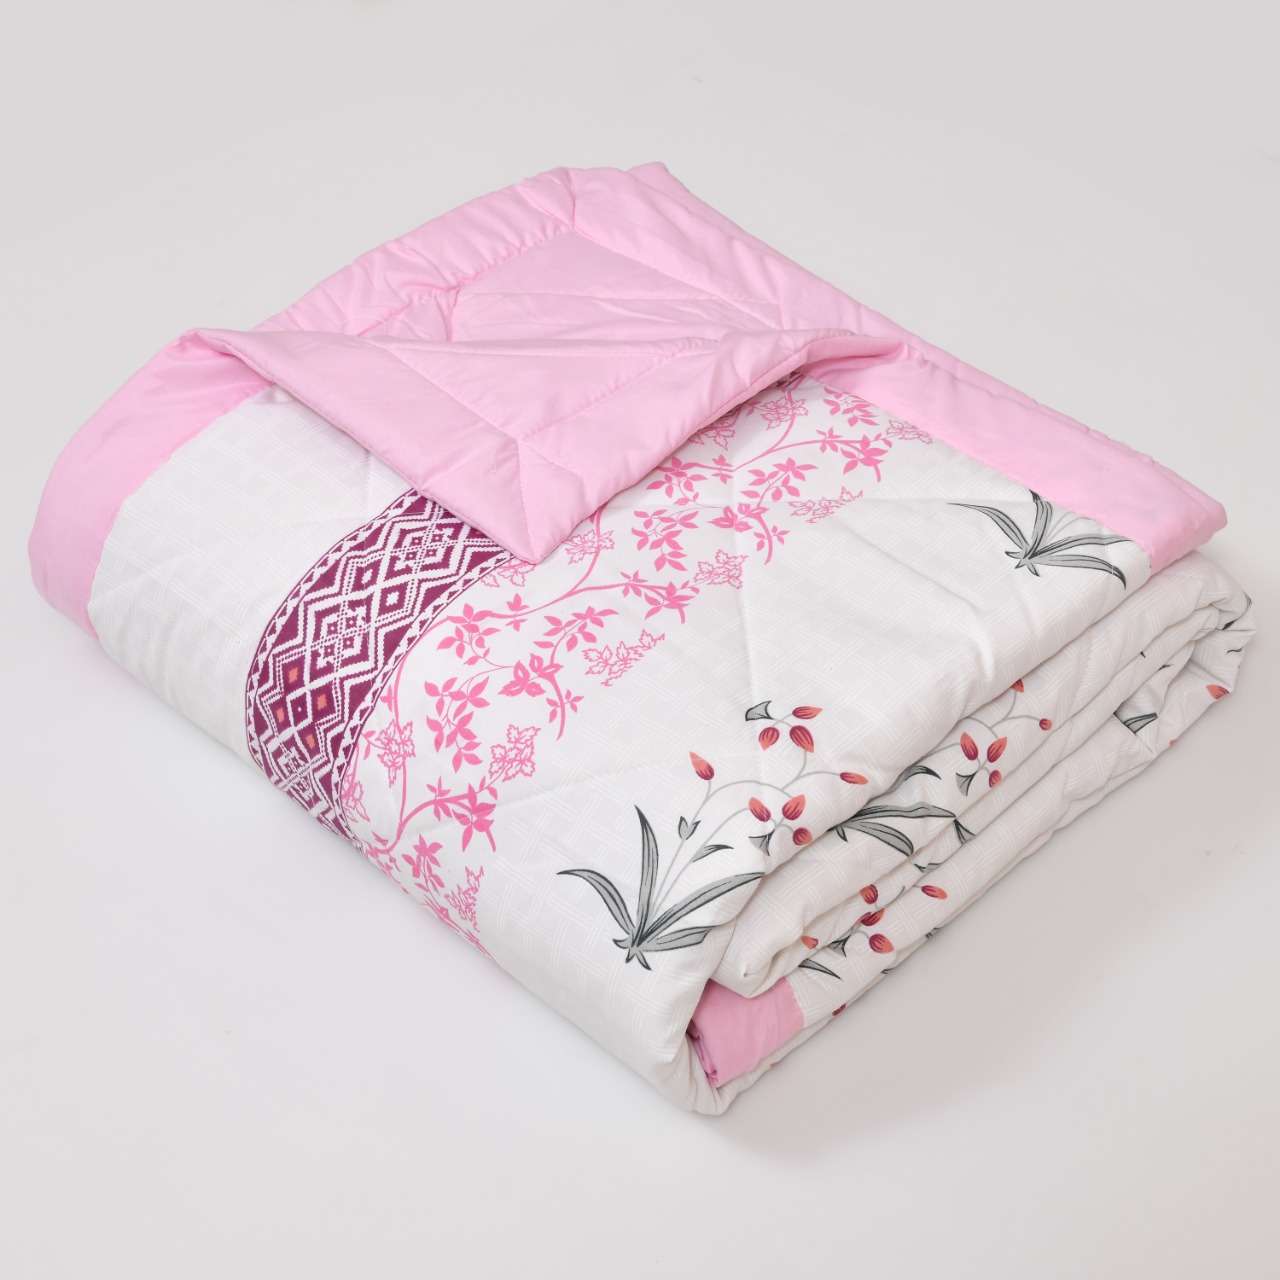 Iconic Iris Pink Cotton Quilted Bedcover Comforter Blanket